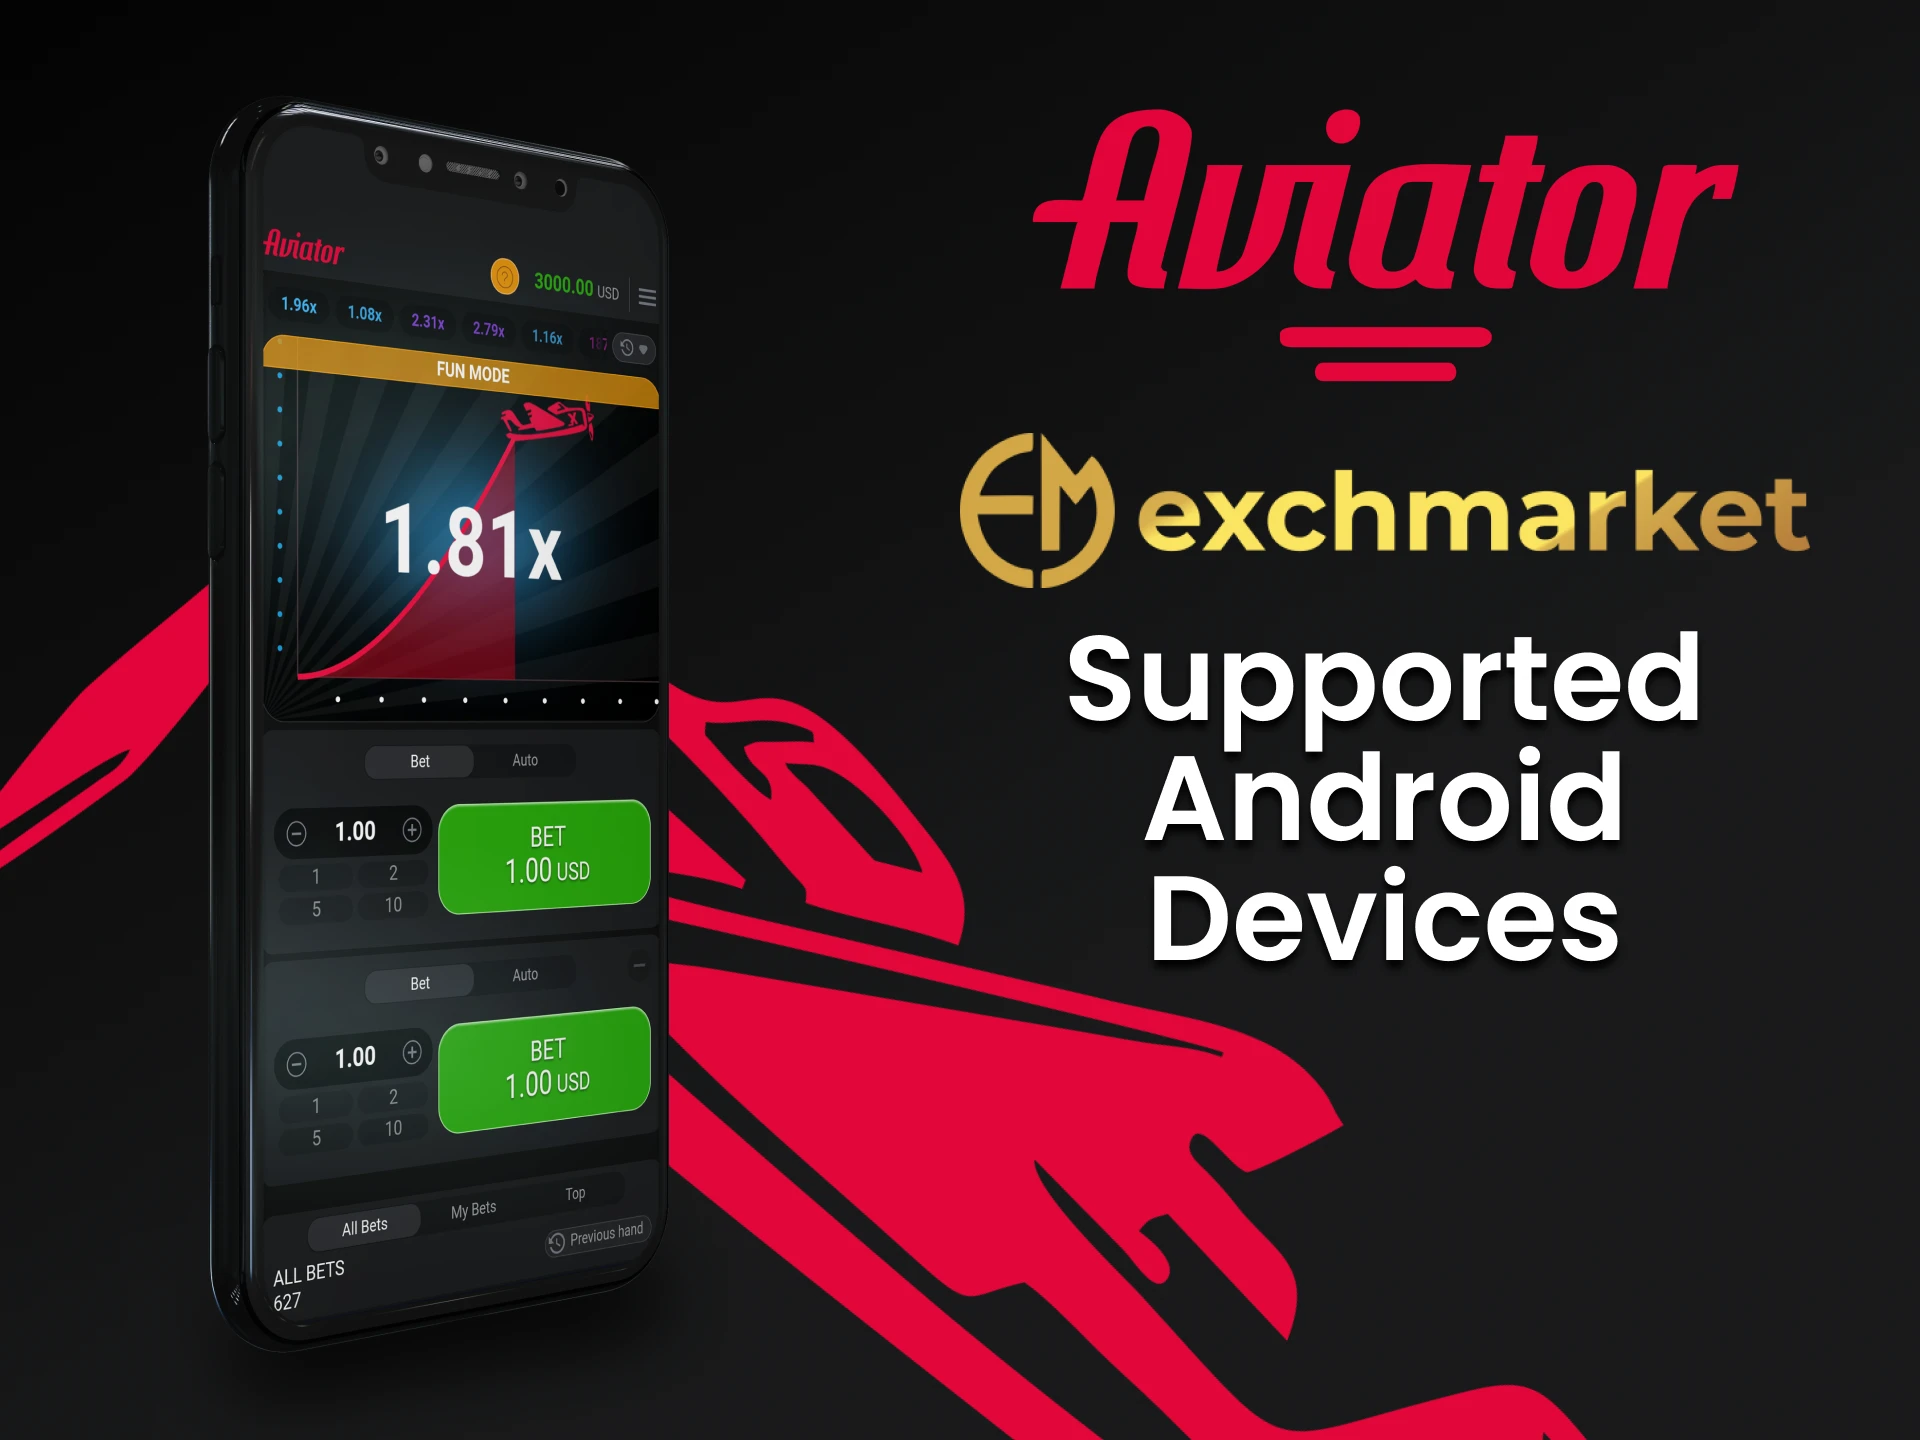 Play Aviator through your Android device on Exchmarket.